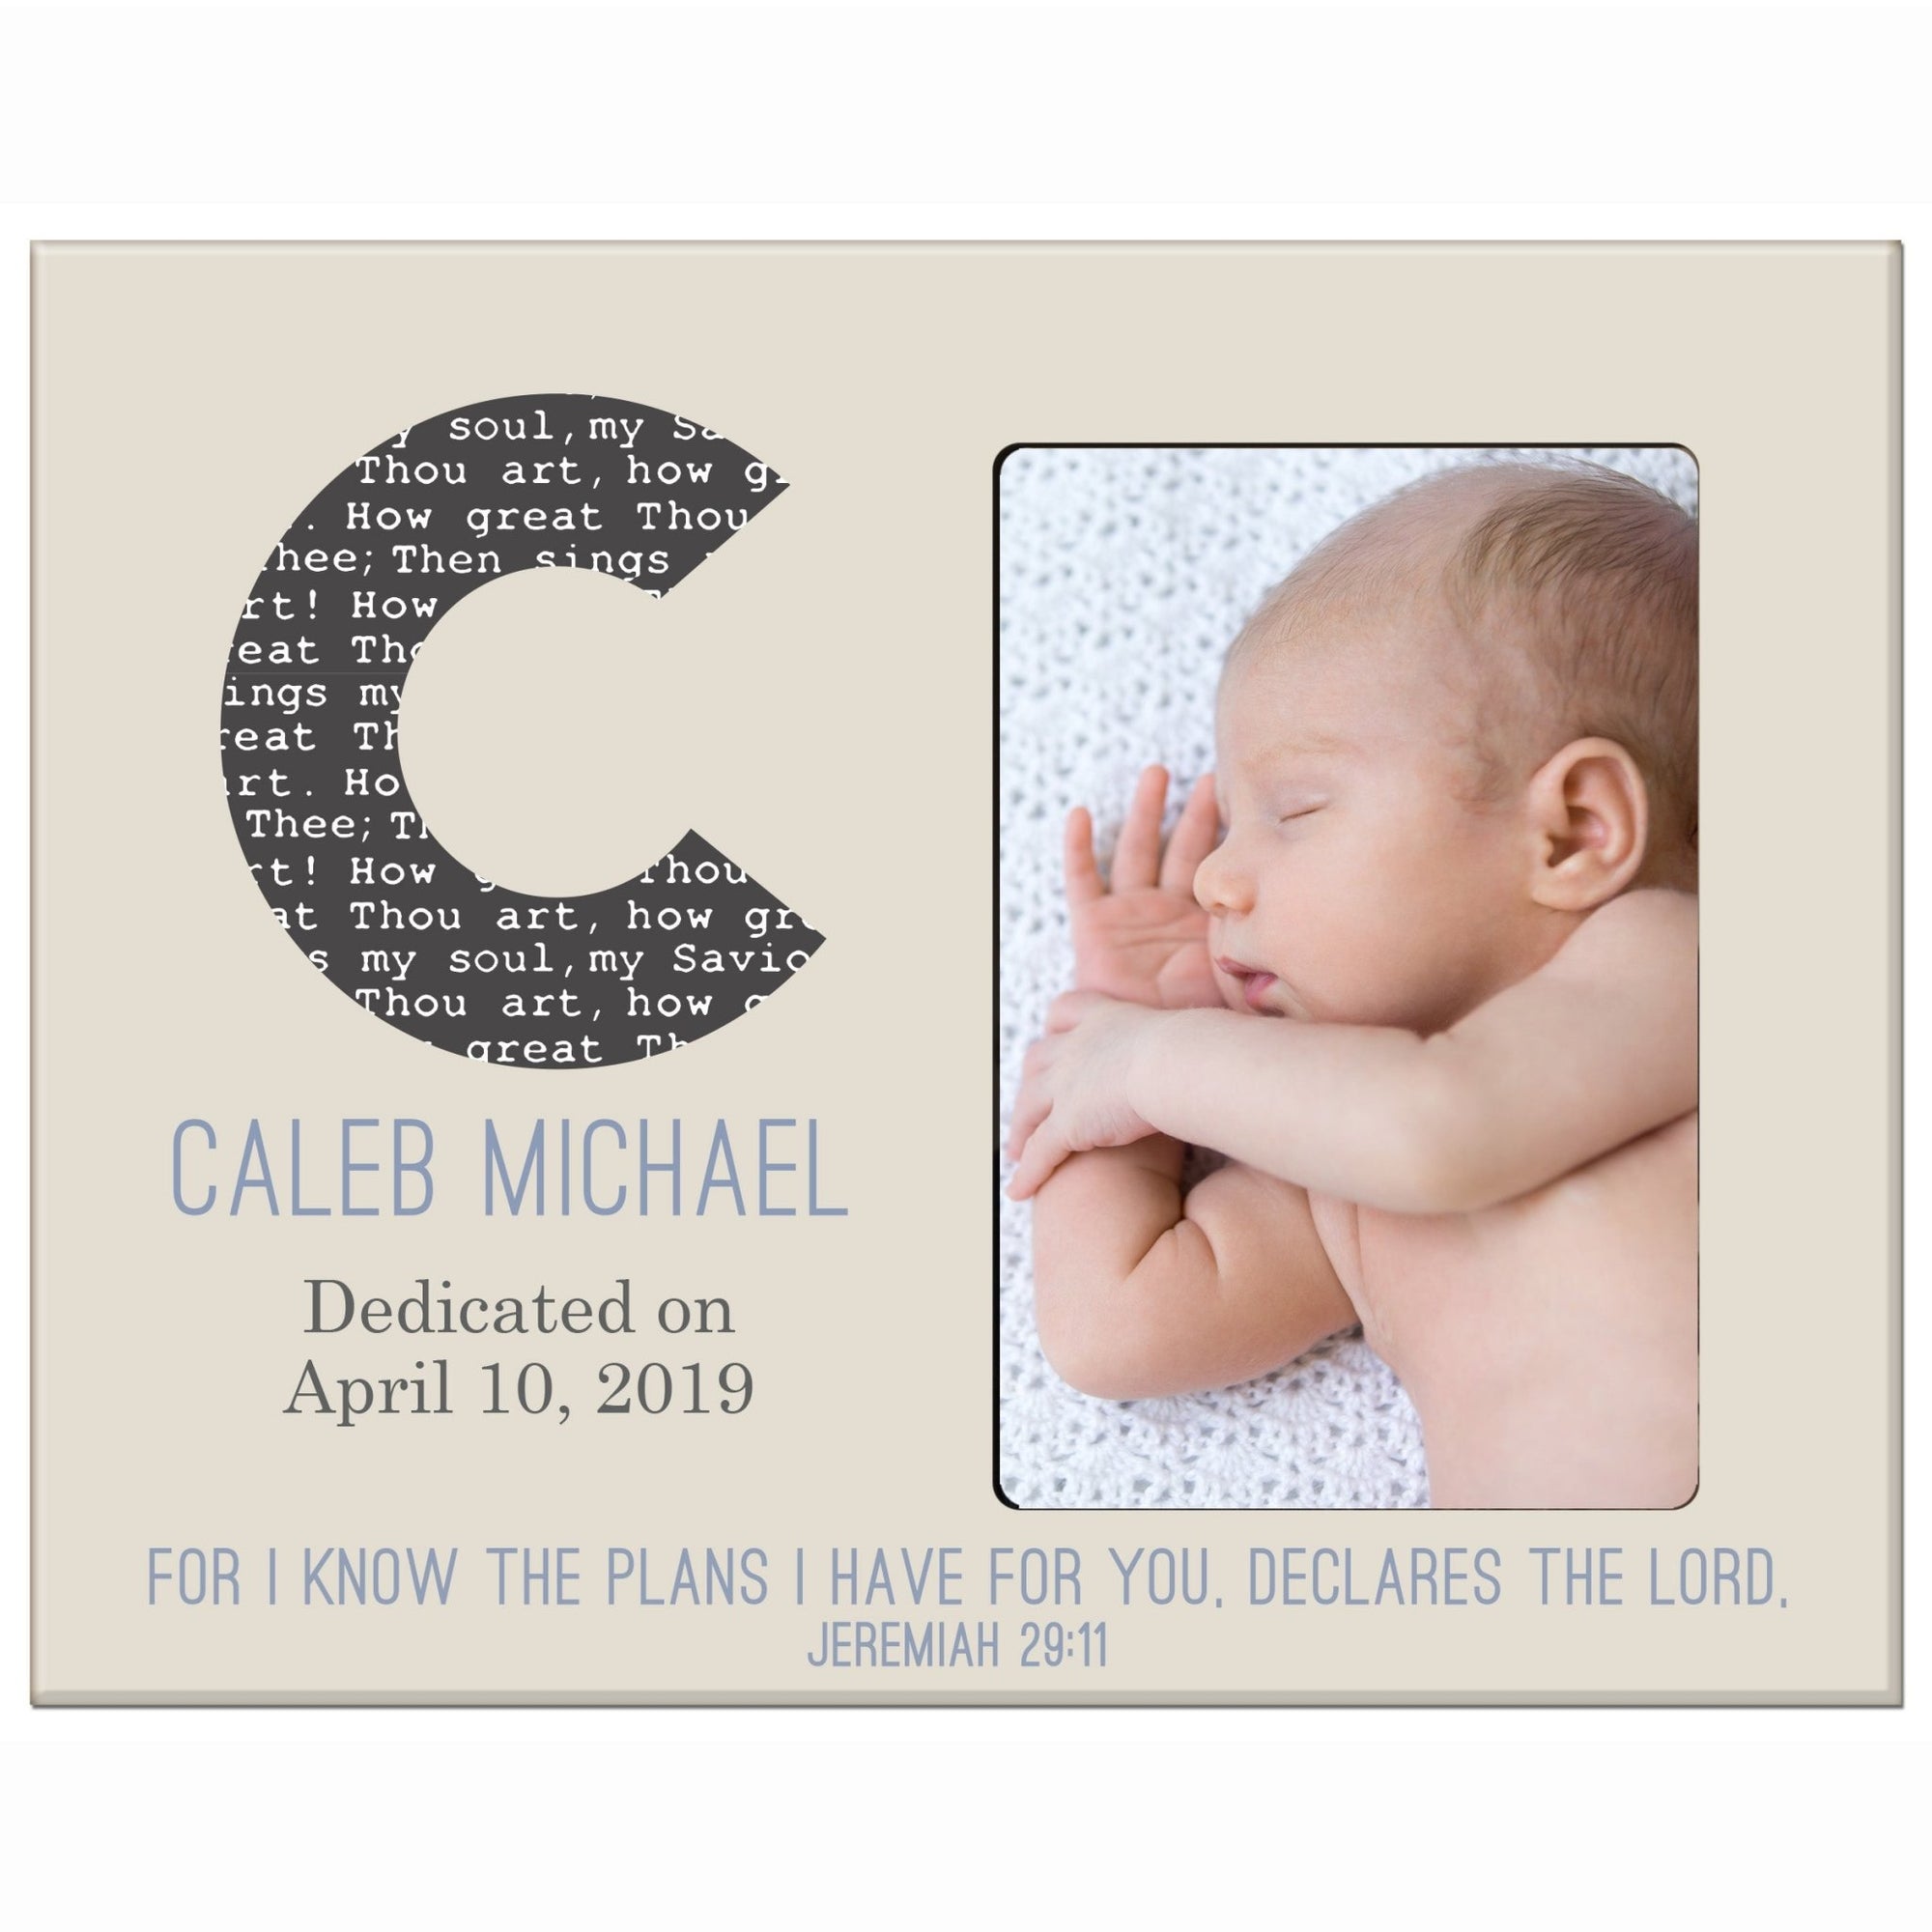 Baby Birth Announcement Photo Frame For Boys and Girls The Plans - LifeSong Milestones